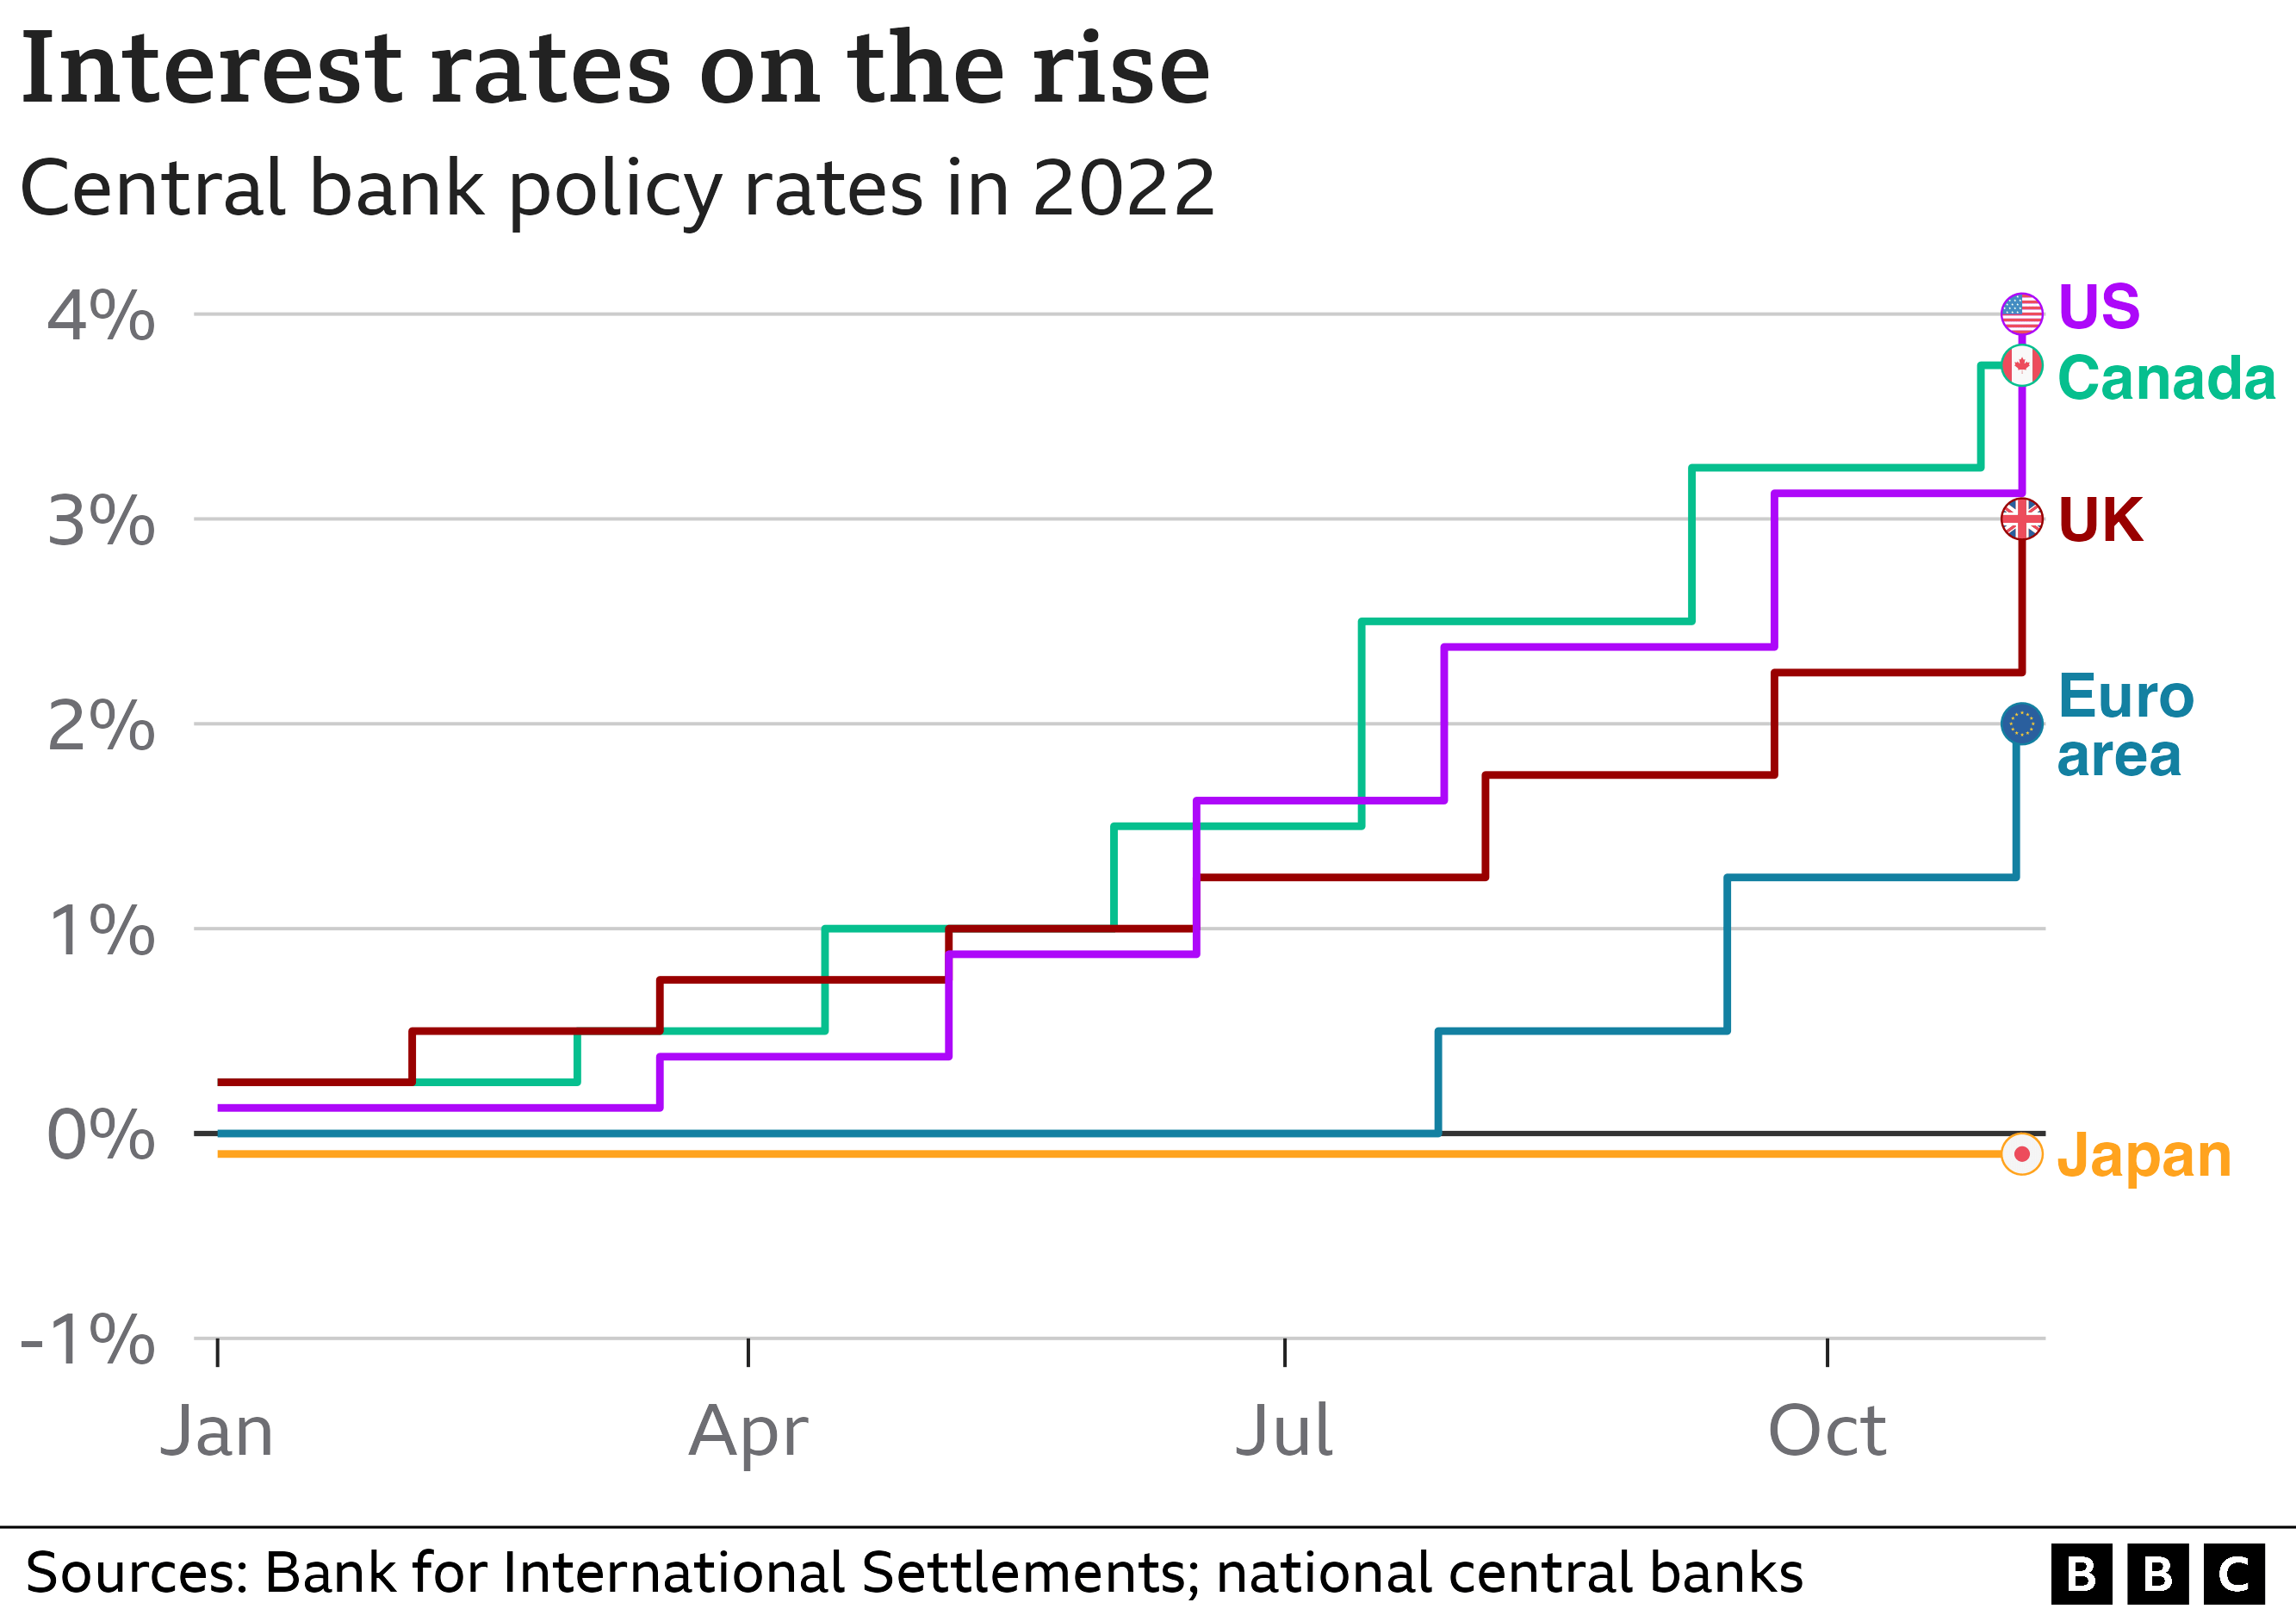 Graph showing interest rates of different central banks